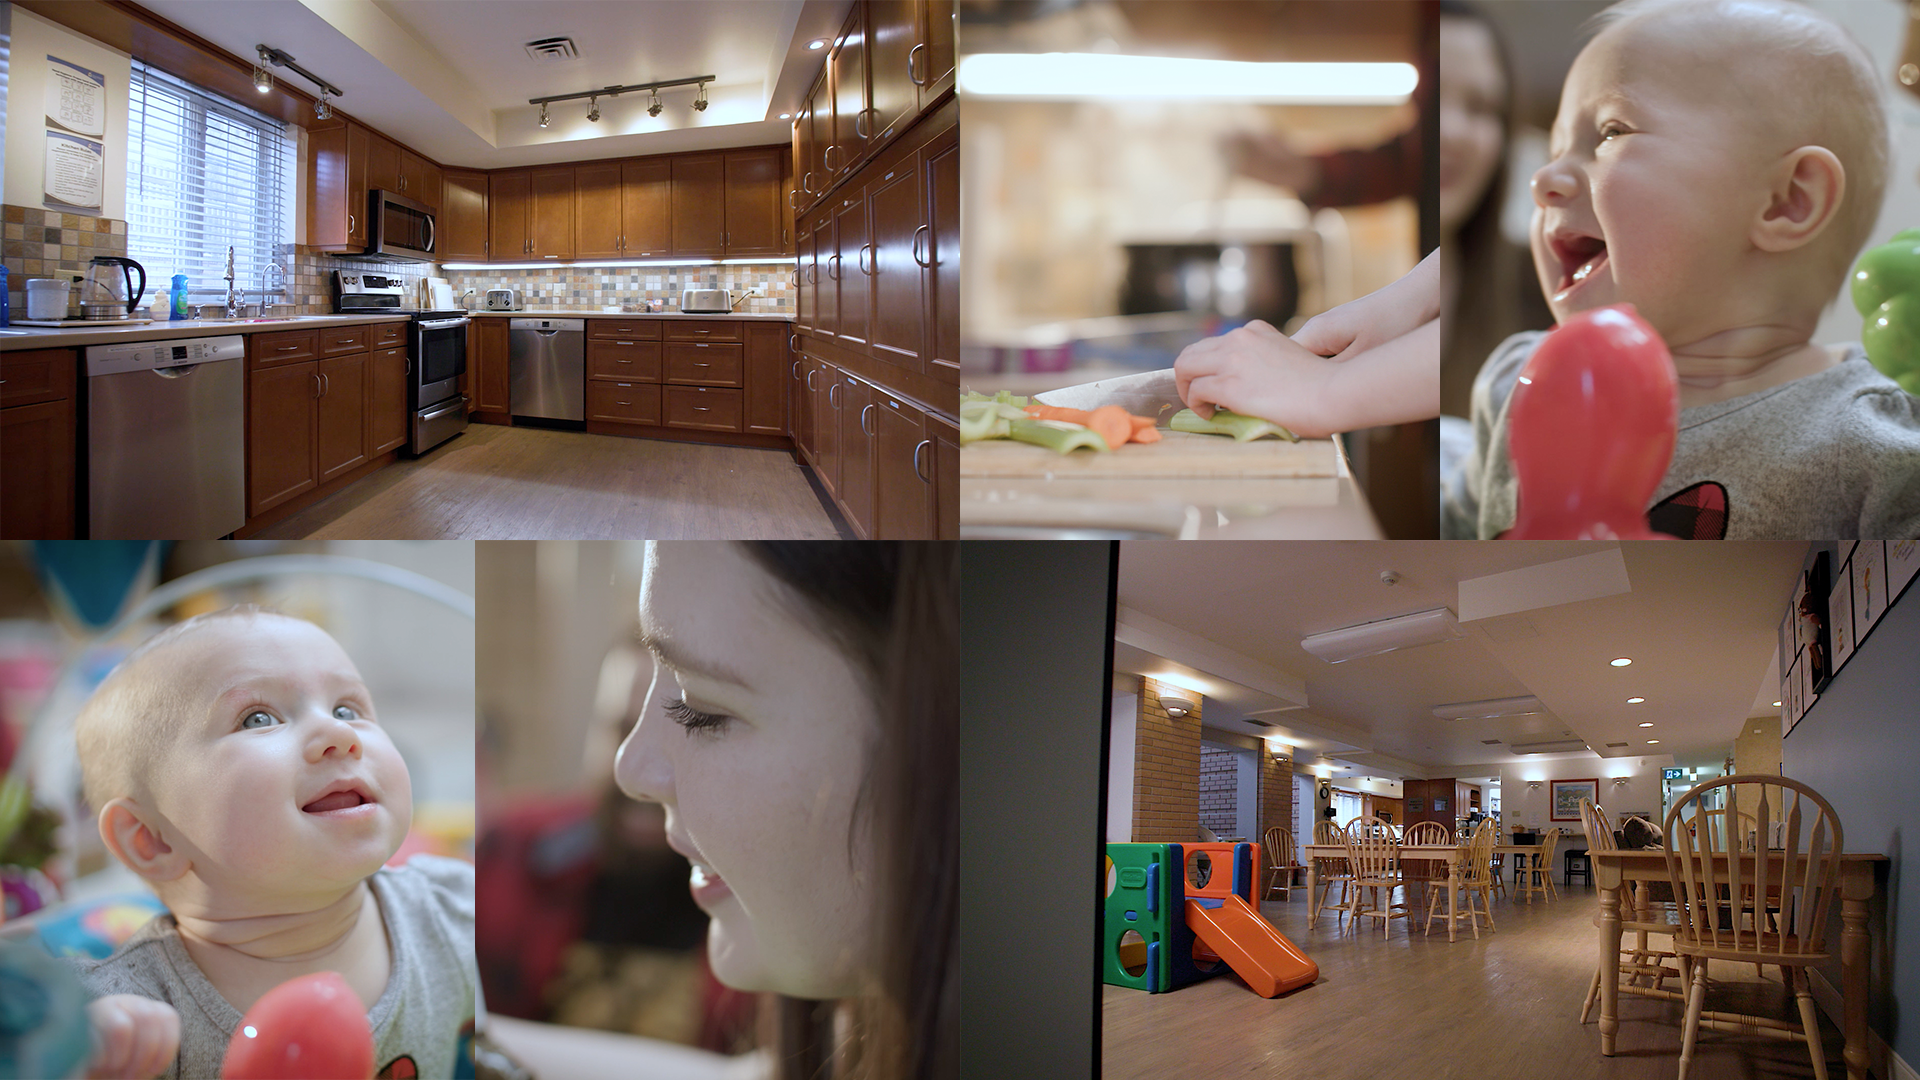 A collage of images featuring a kitchen space, a smiling baby, a family room interior and a woman cutting vegetables.